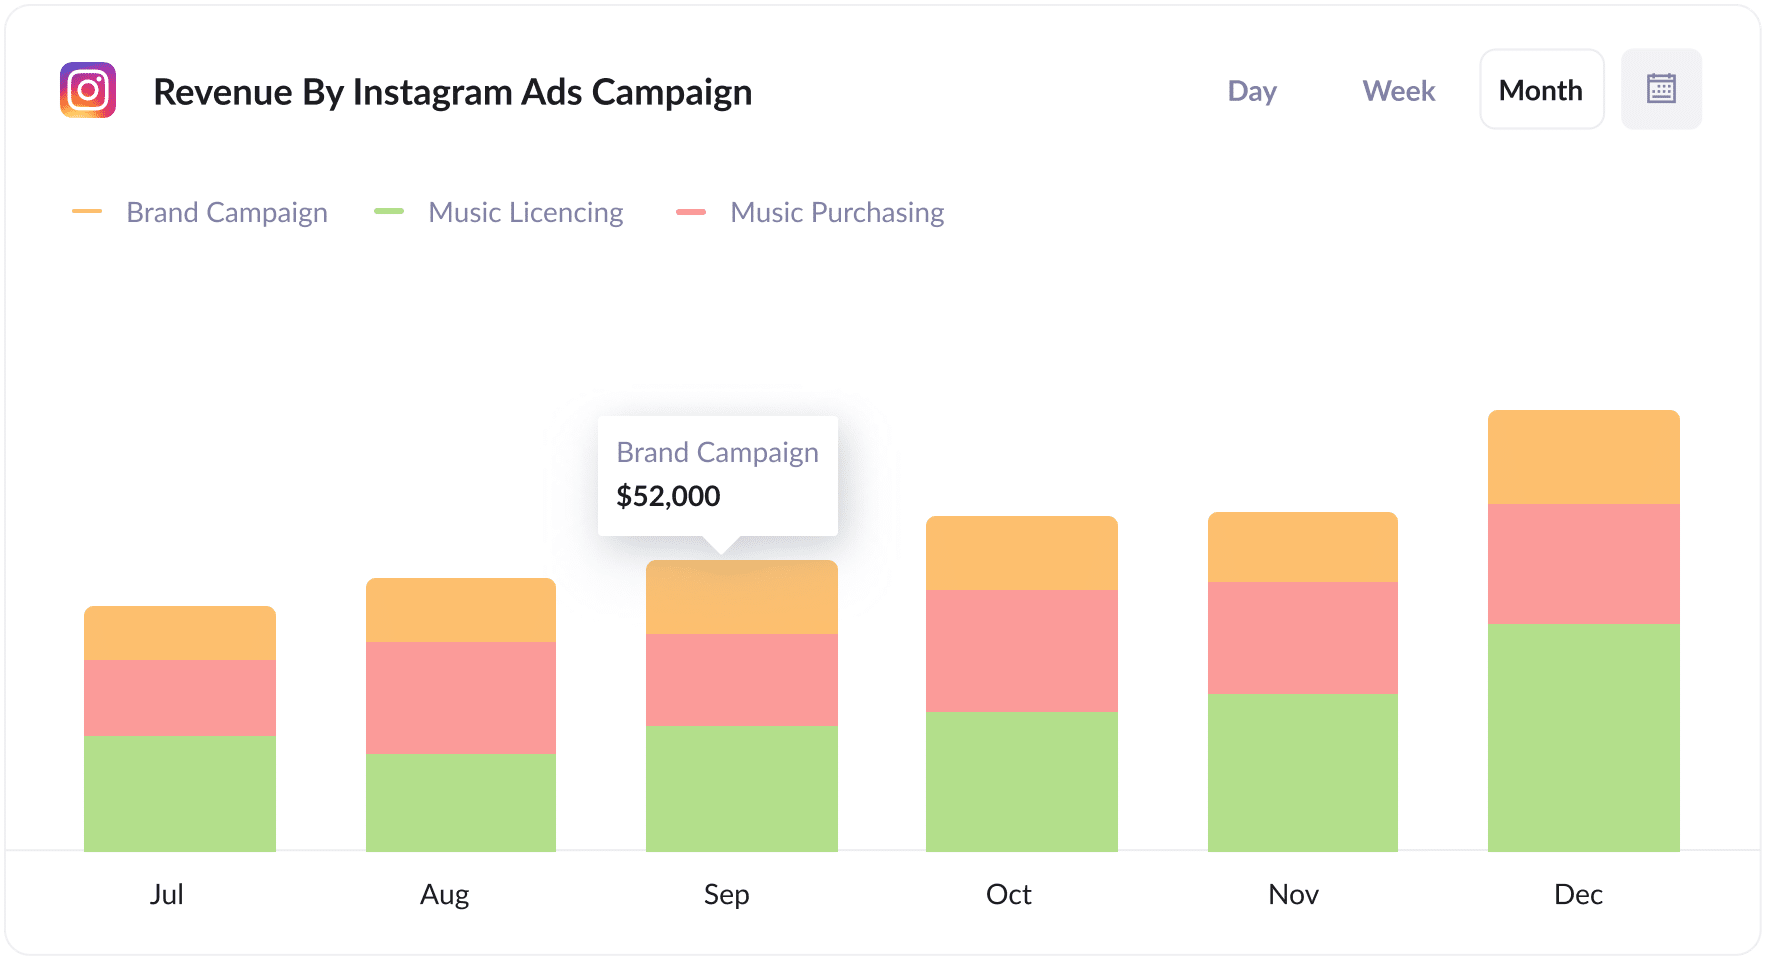 Revenue By Instagram Ad Campaign